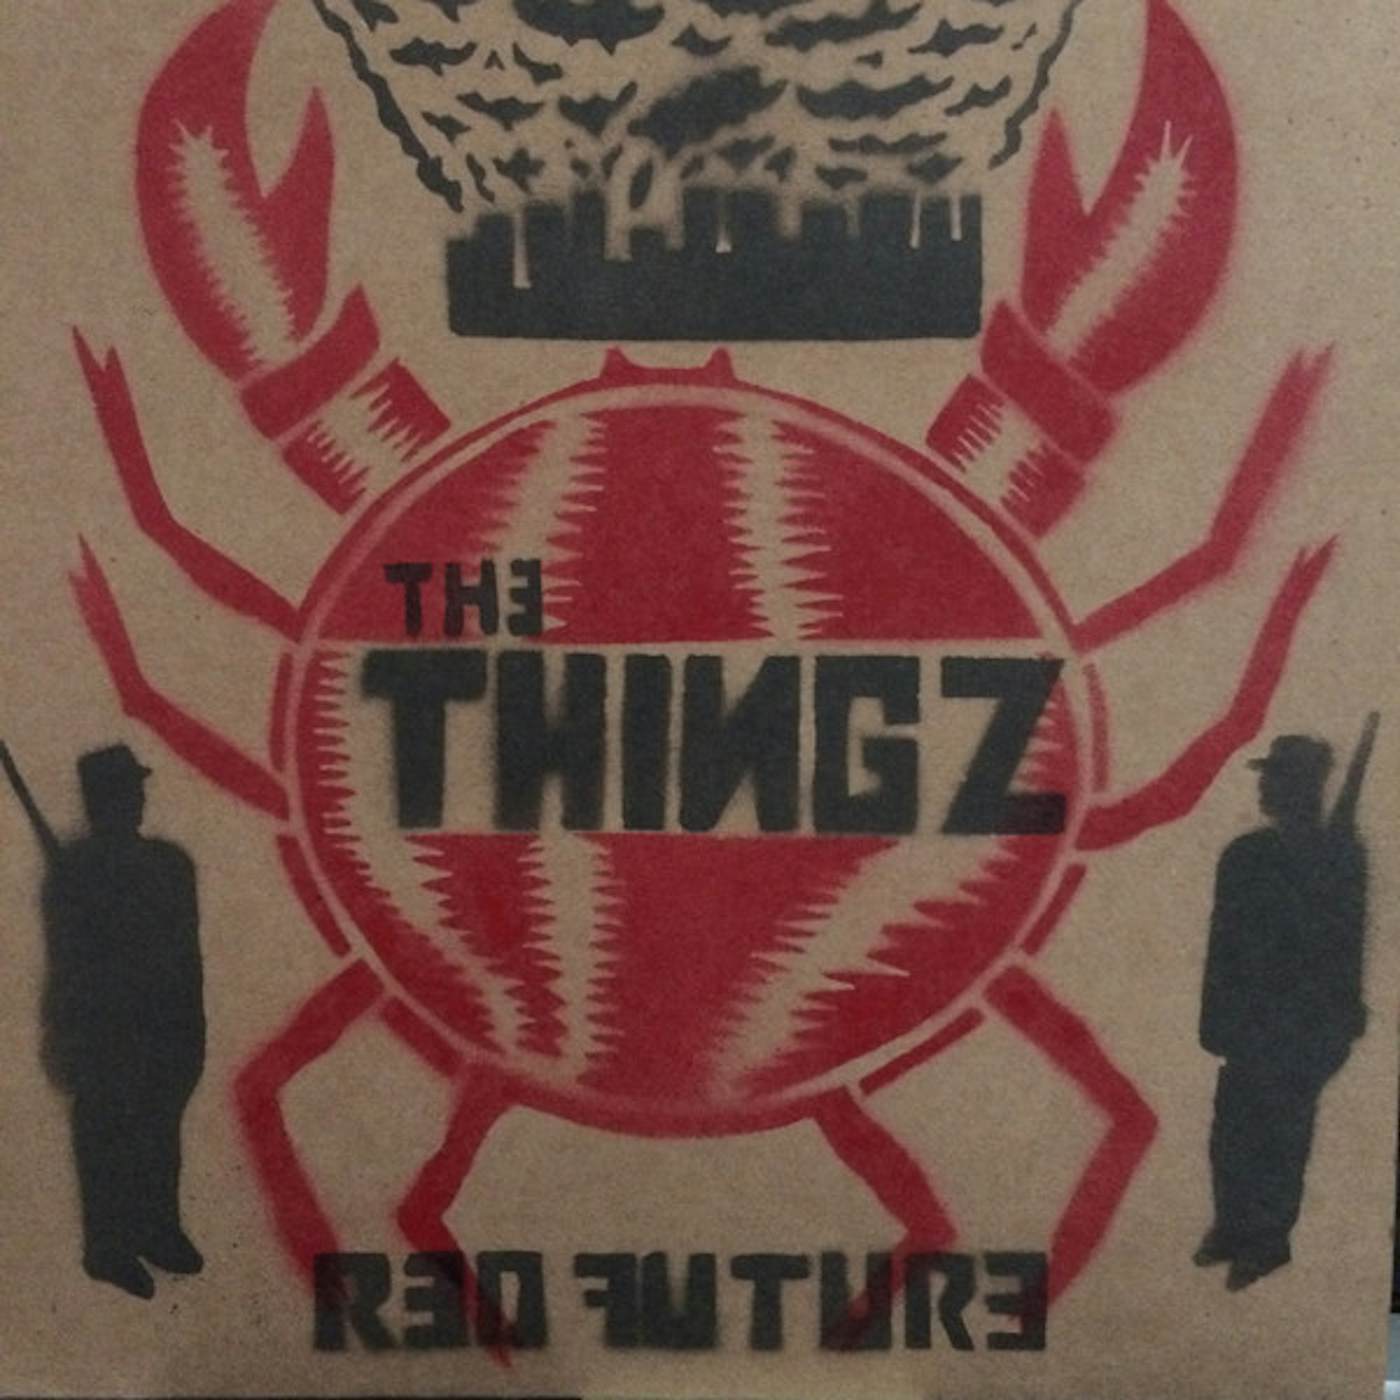 The Thingz RED FUTURE Vinyl Record